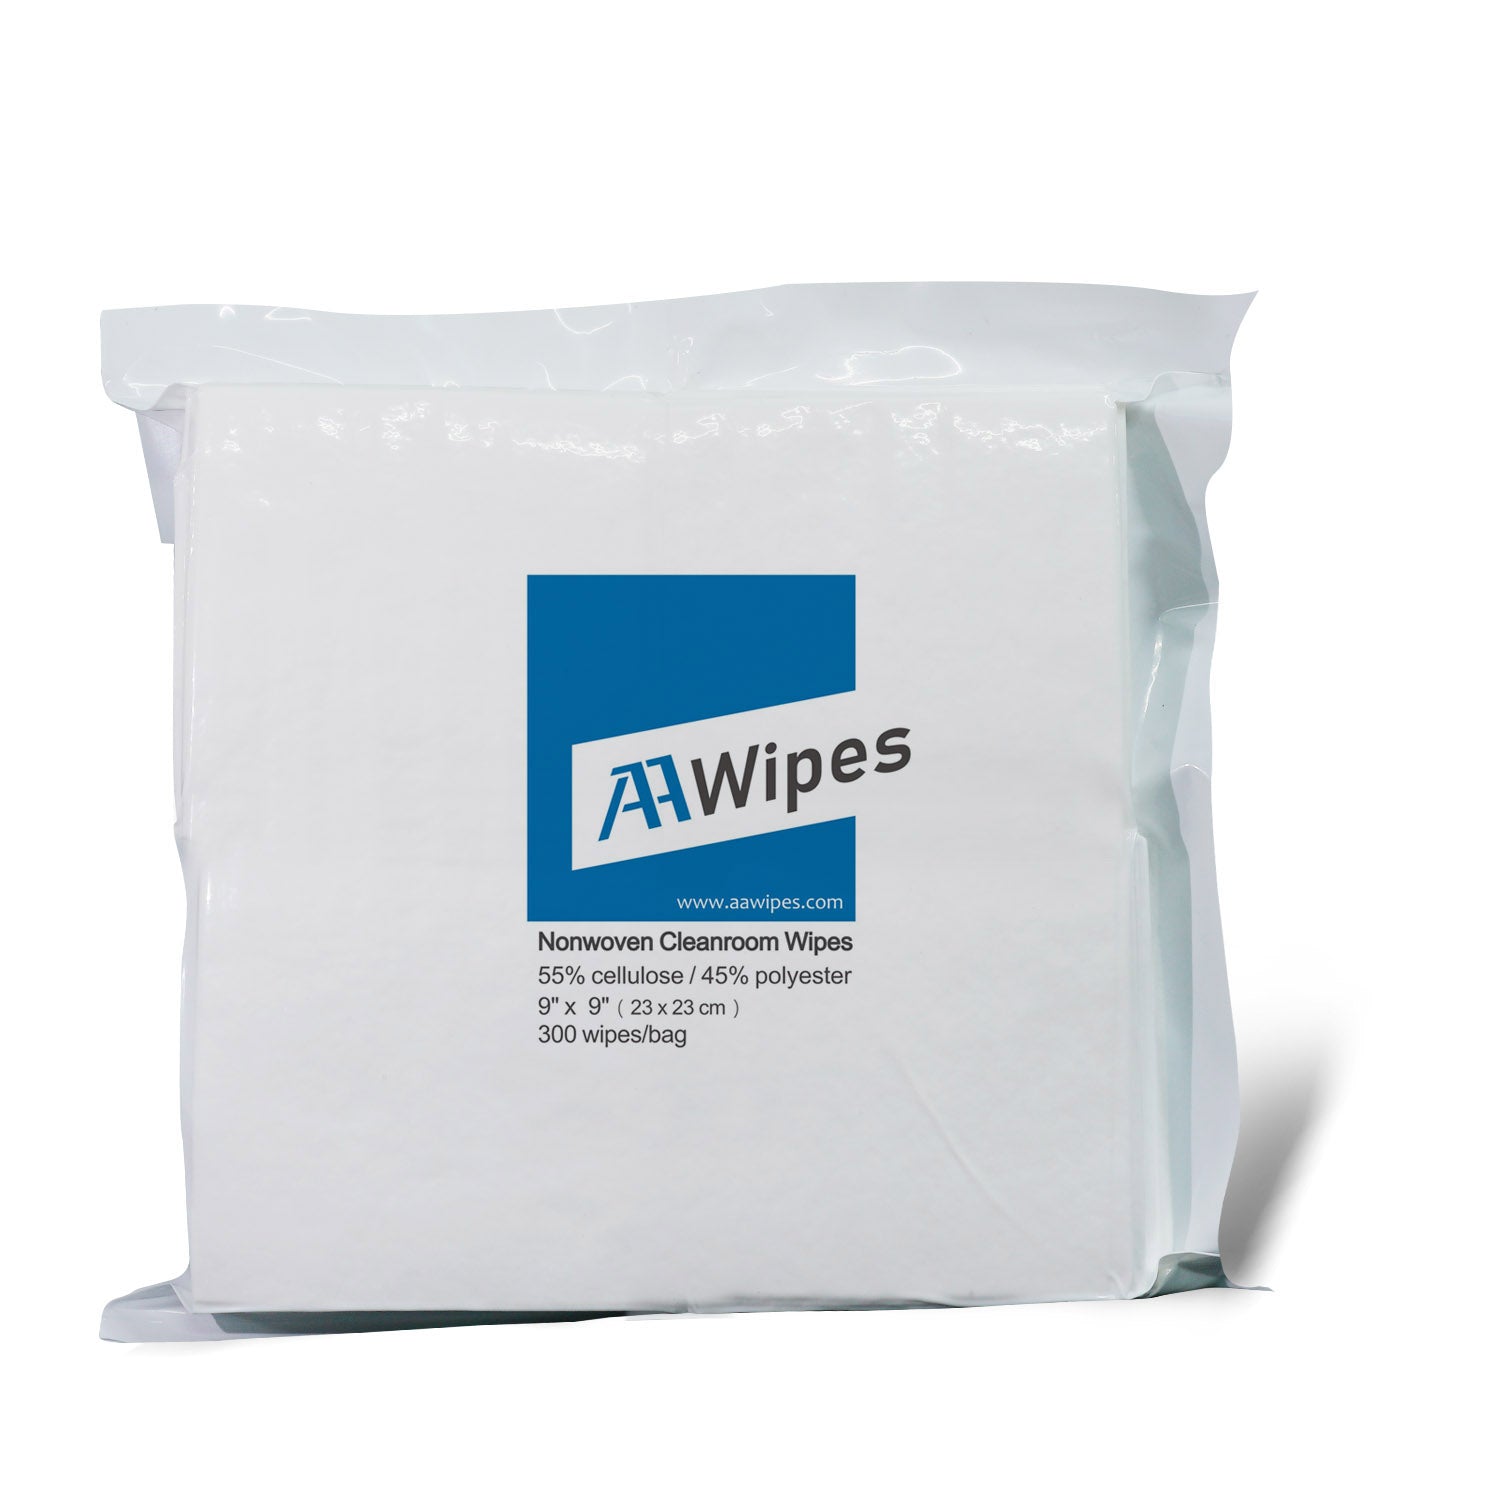 Automotive Cleanroom Wipers Nonwoven 9"x9" Cellulose/Polyester Blend Disposable Wipes for Lab, Food Service, Printing and Semiconductor Industries. Starts with 4,200 wipes/box in 14 bags (No. NW06809).